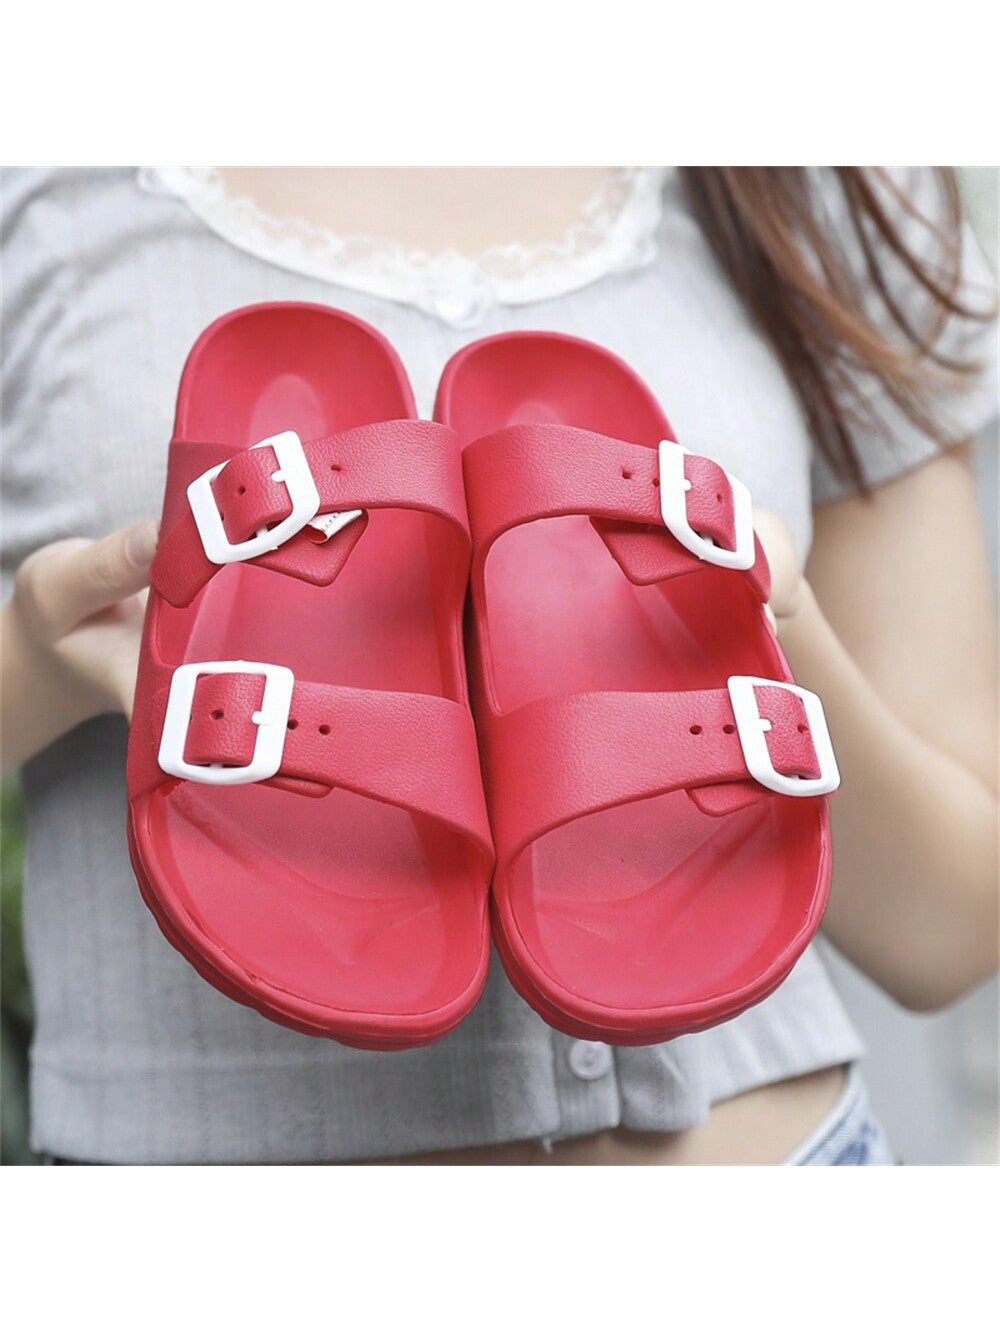 Spring And Summer New Arrival Ultra-Clear Breathable Women\ Sandals Large Size Women\ Shoes Outdoor Beach Shoes Non-Slip Wear-Resistant Soft And Comfortable-Red-2